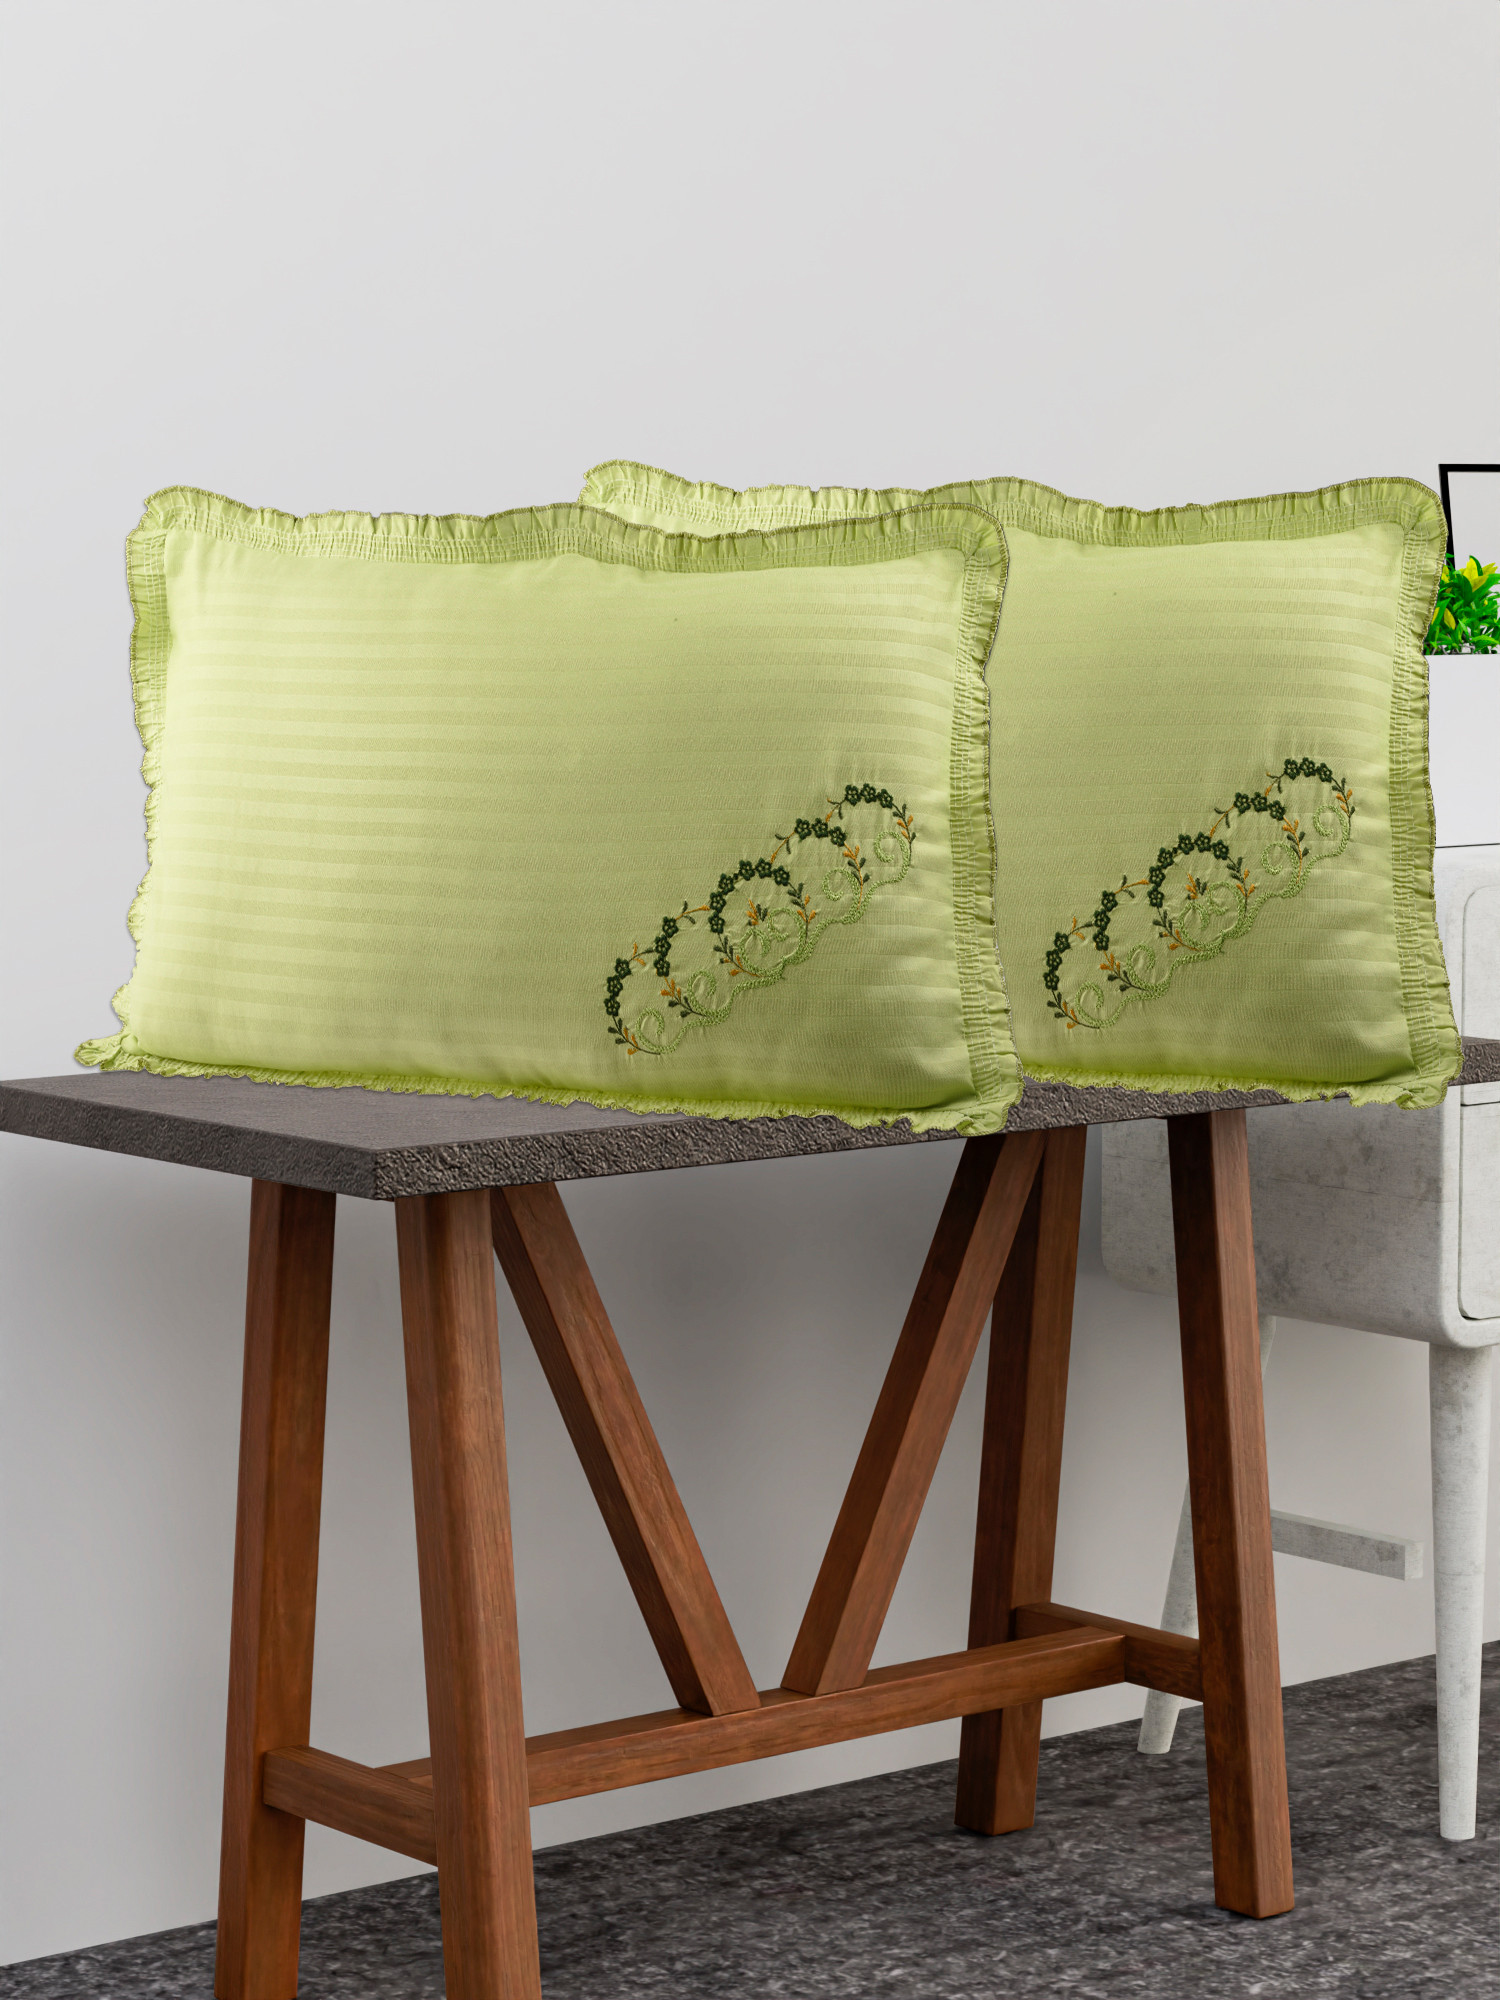 Kuber Industries Pillow Cover | Cotton Pillow Cover Set | Cushion Pillow Cover Set | Pillow Cover Set for Bedroom | Lining Embroidery Pillow Cover Set |Parrot Green